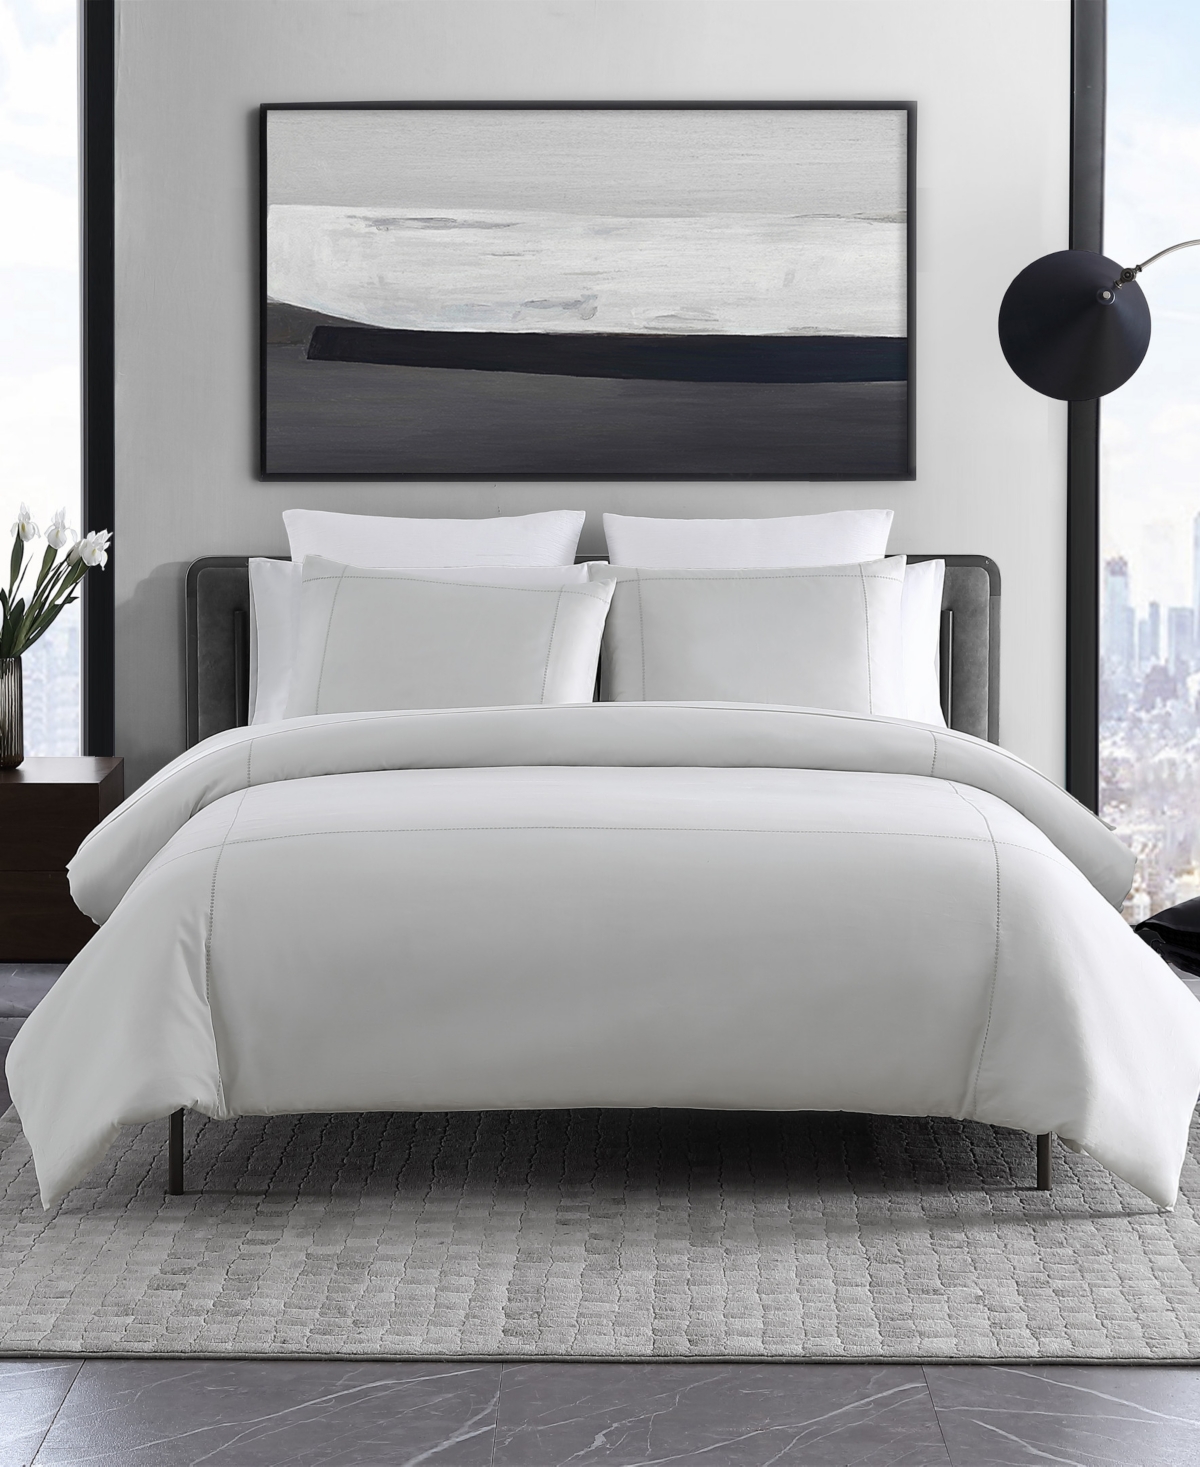 Vera Wang Simple Dot Embroidered Cotton Sateen Duvet Cover Sets Collection Bedding In Pale Gray